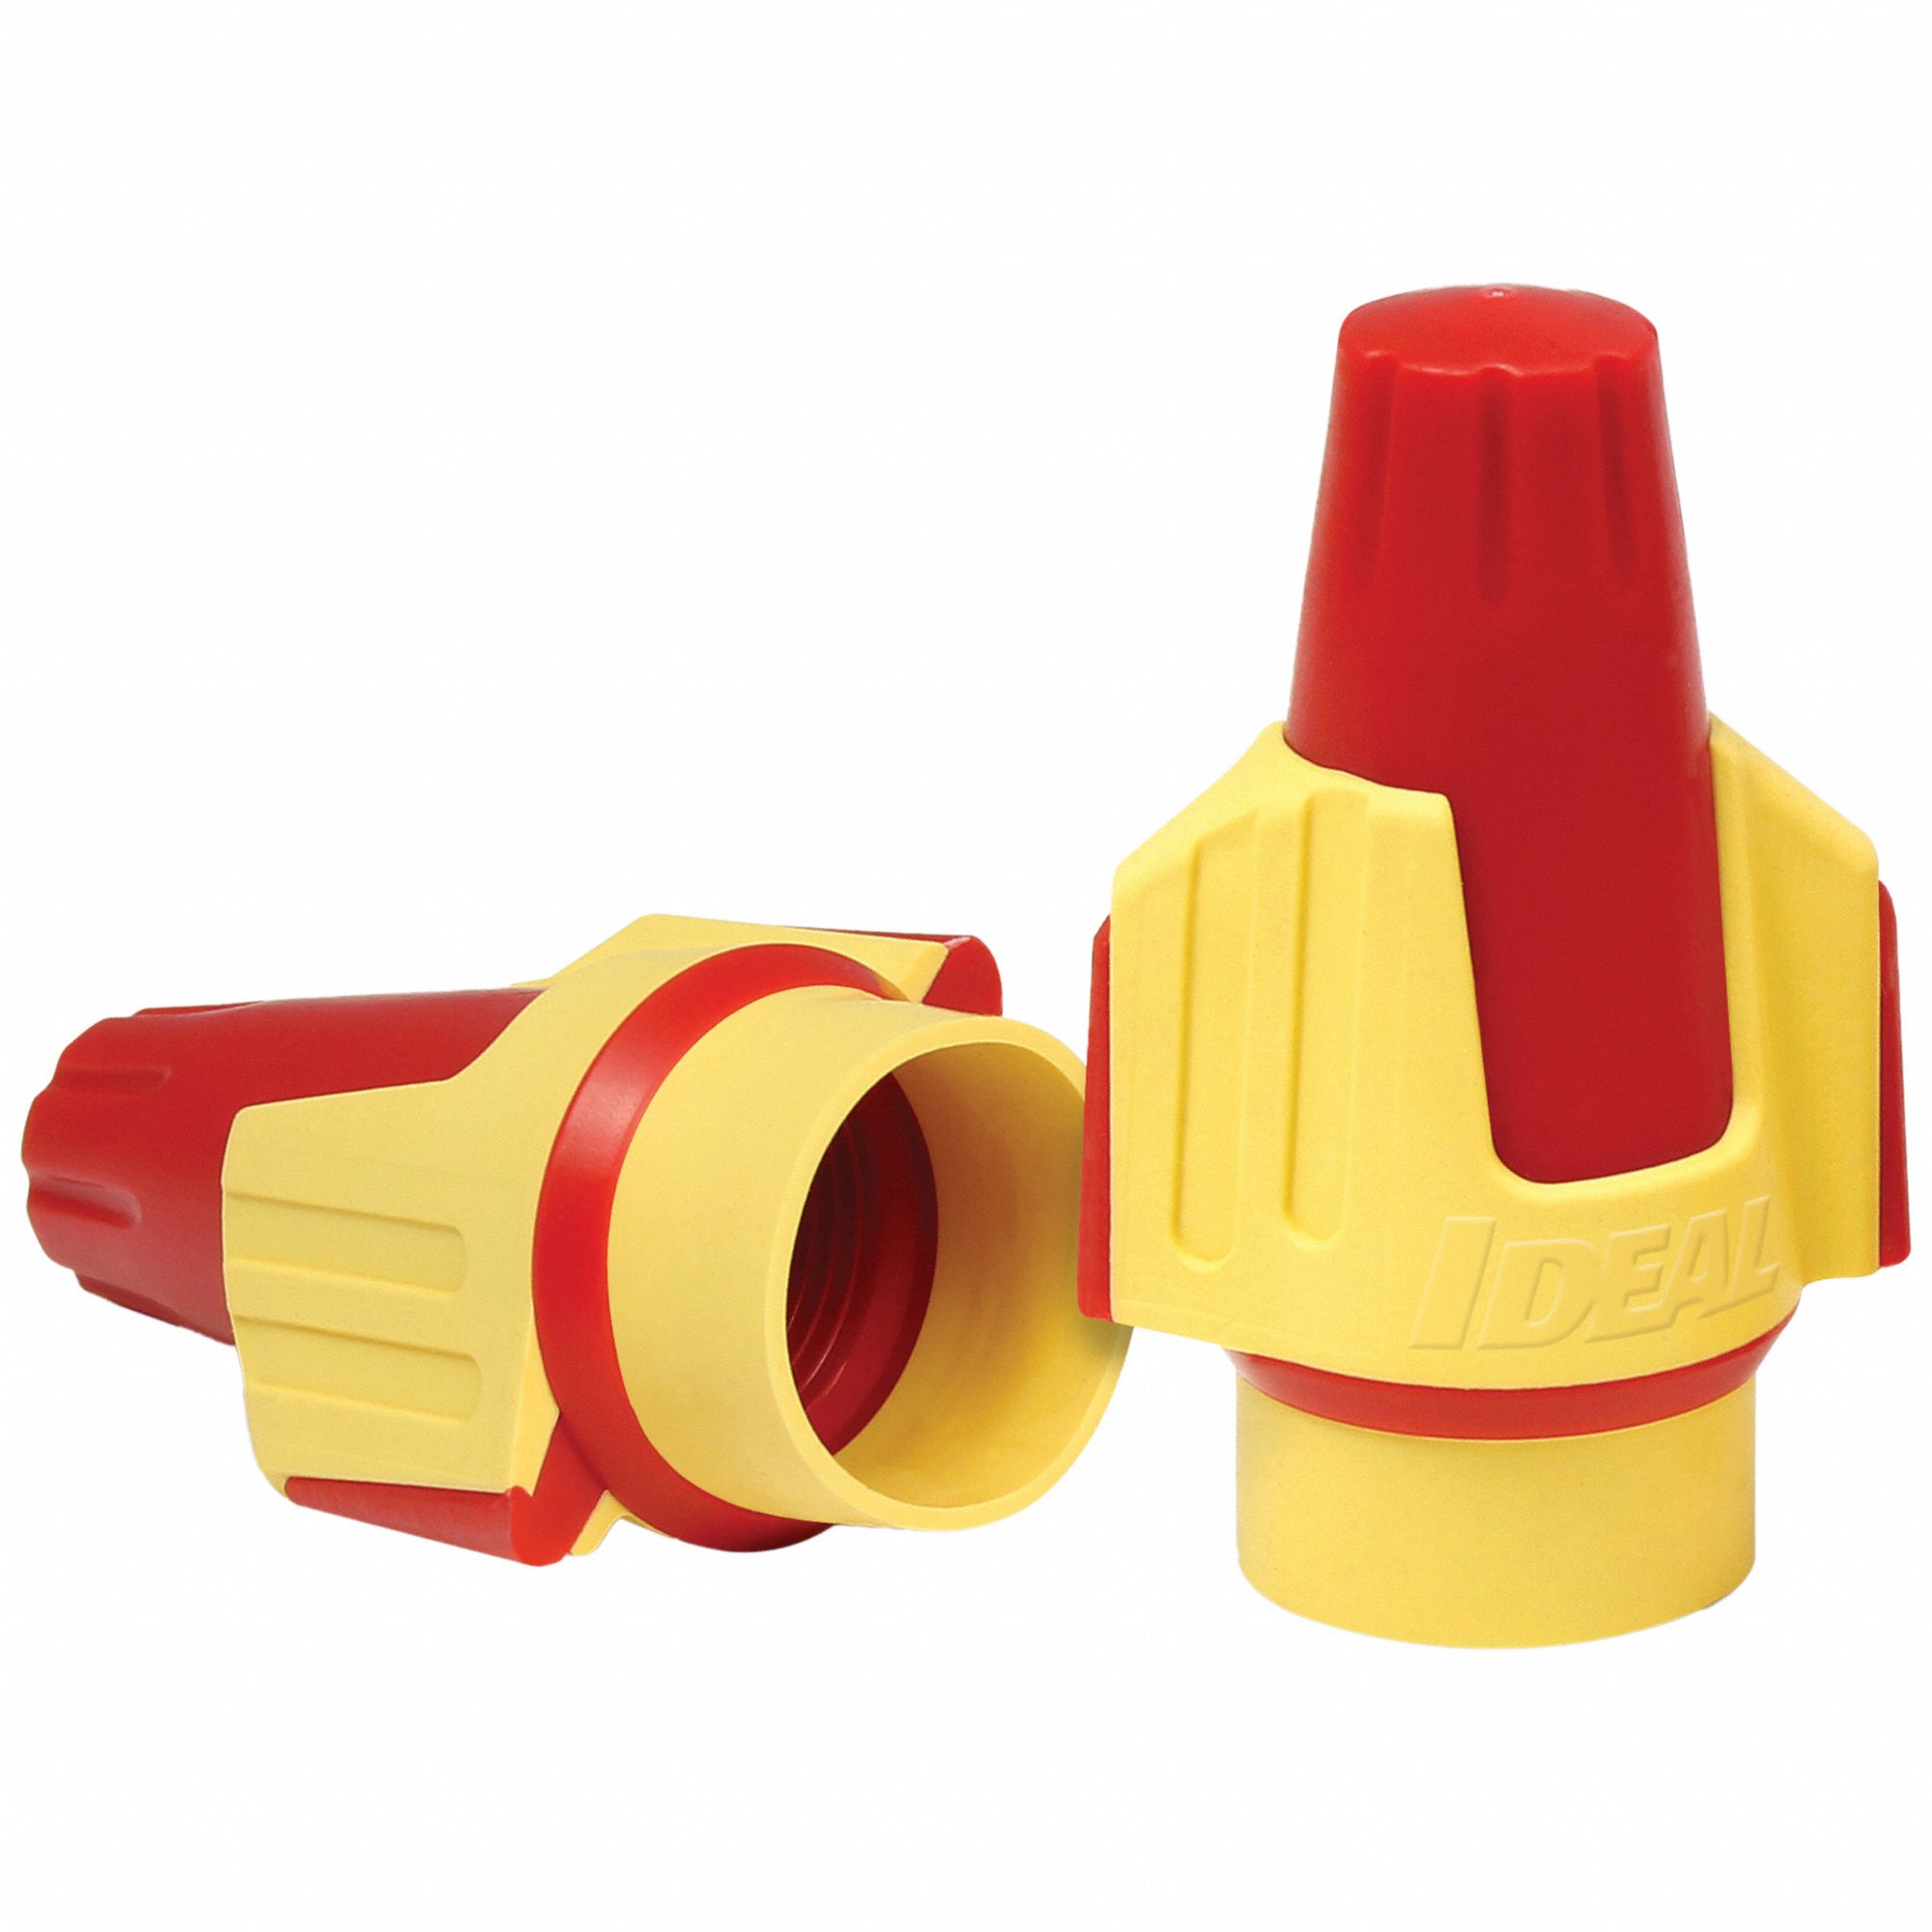 Twist On Wire Connector: Red/Yellow, 22 AWG – 8 AWG Twist-On Wire Size Ranges, 250 PK